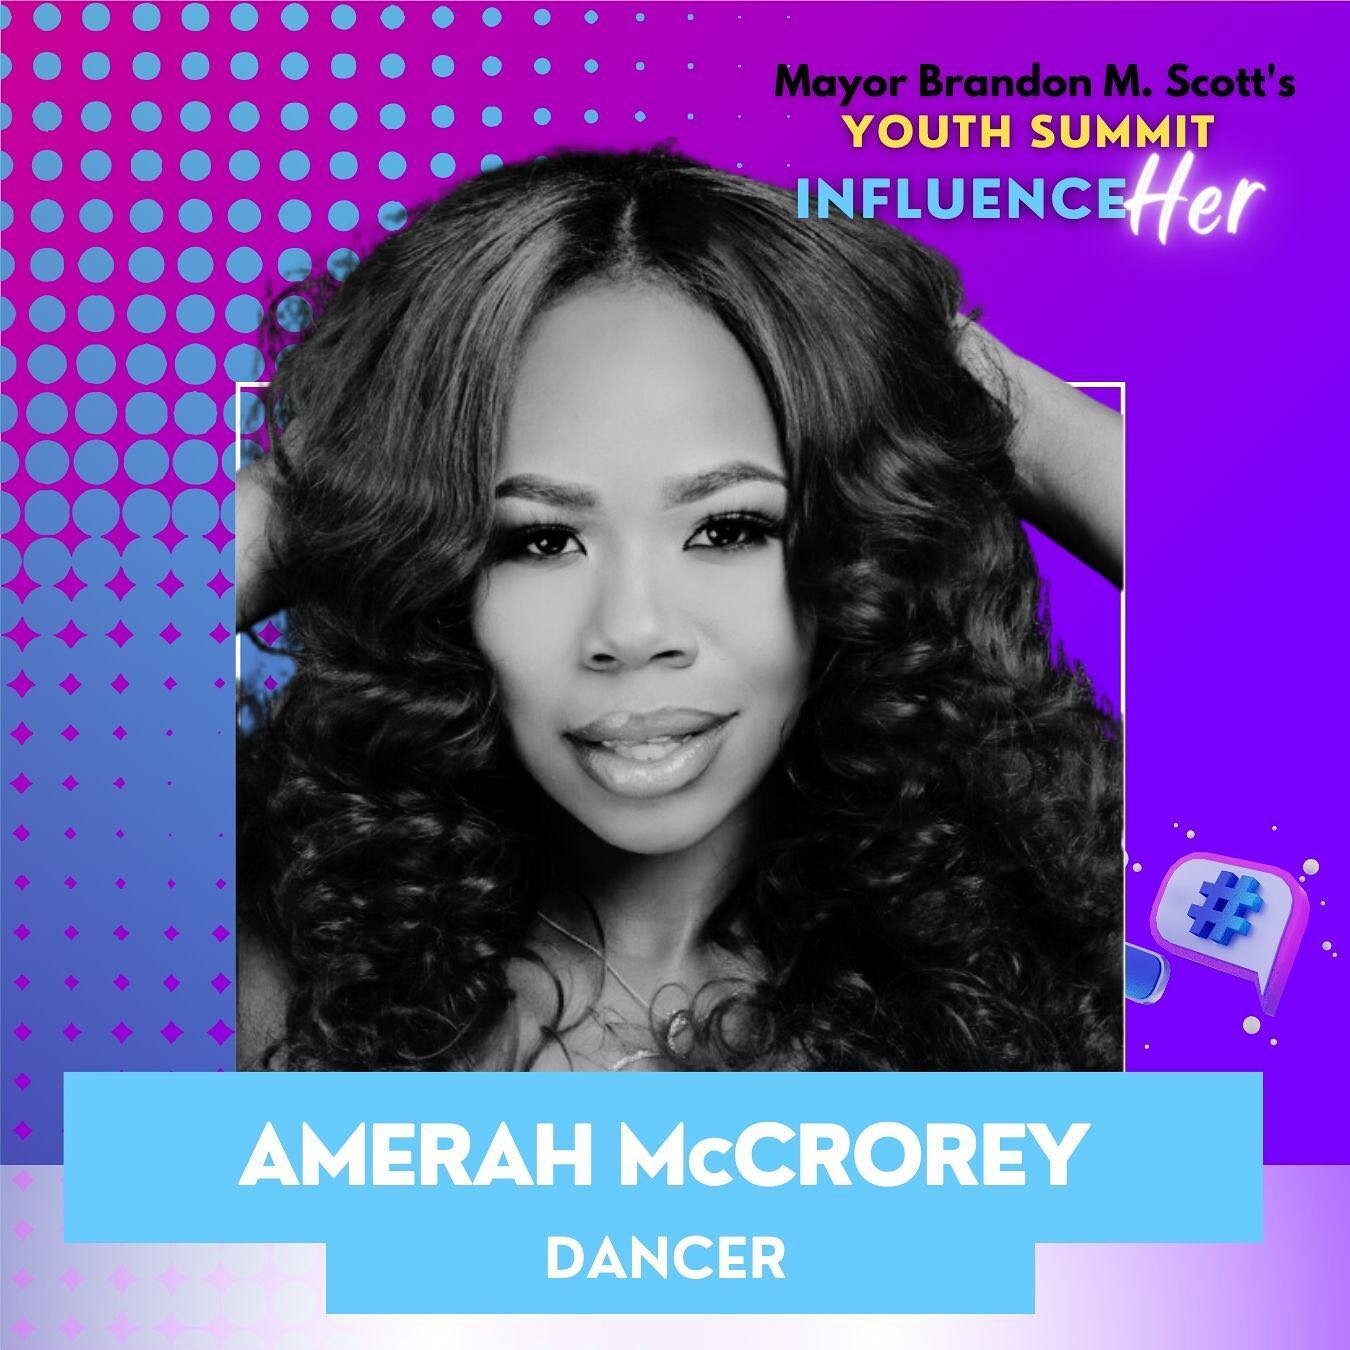 💖💜: MEET THE PANELIST: 

Amerah McCrorey is a professional female dancer and choreographer who was born and raised in Baltimore,MD. @_amerahh 

Amerah&rsquo;s talent has graced the stages and screens of iconic events such as the Grammy Awards and t